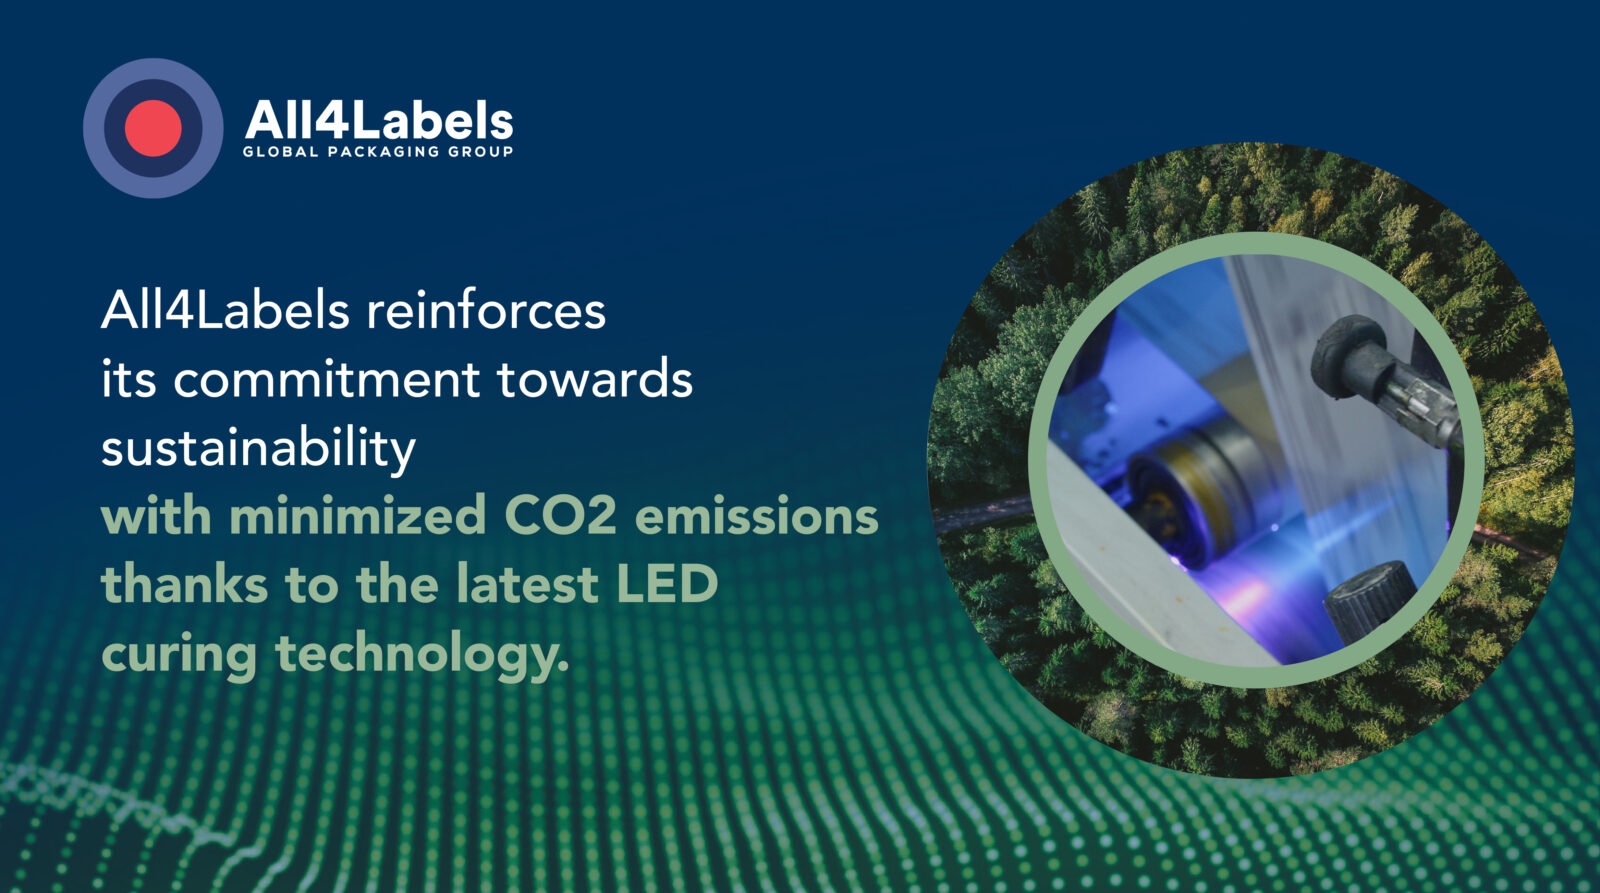 All4Labels expands its sustainable footprint by installing the latest LED curing technology to minimize carbon footprints